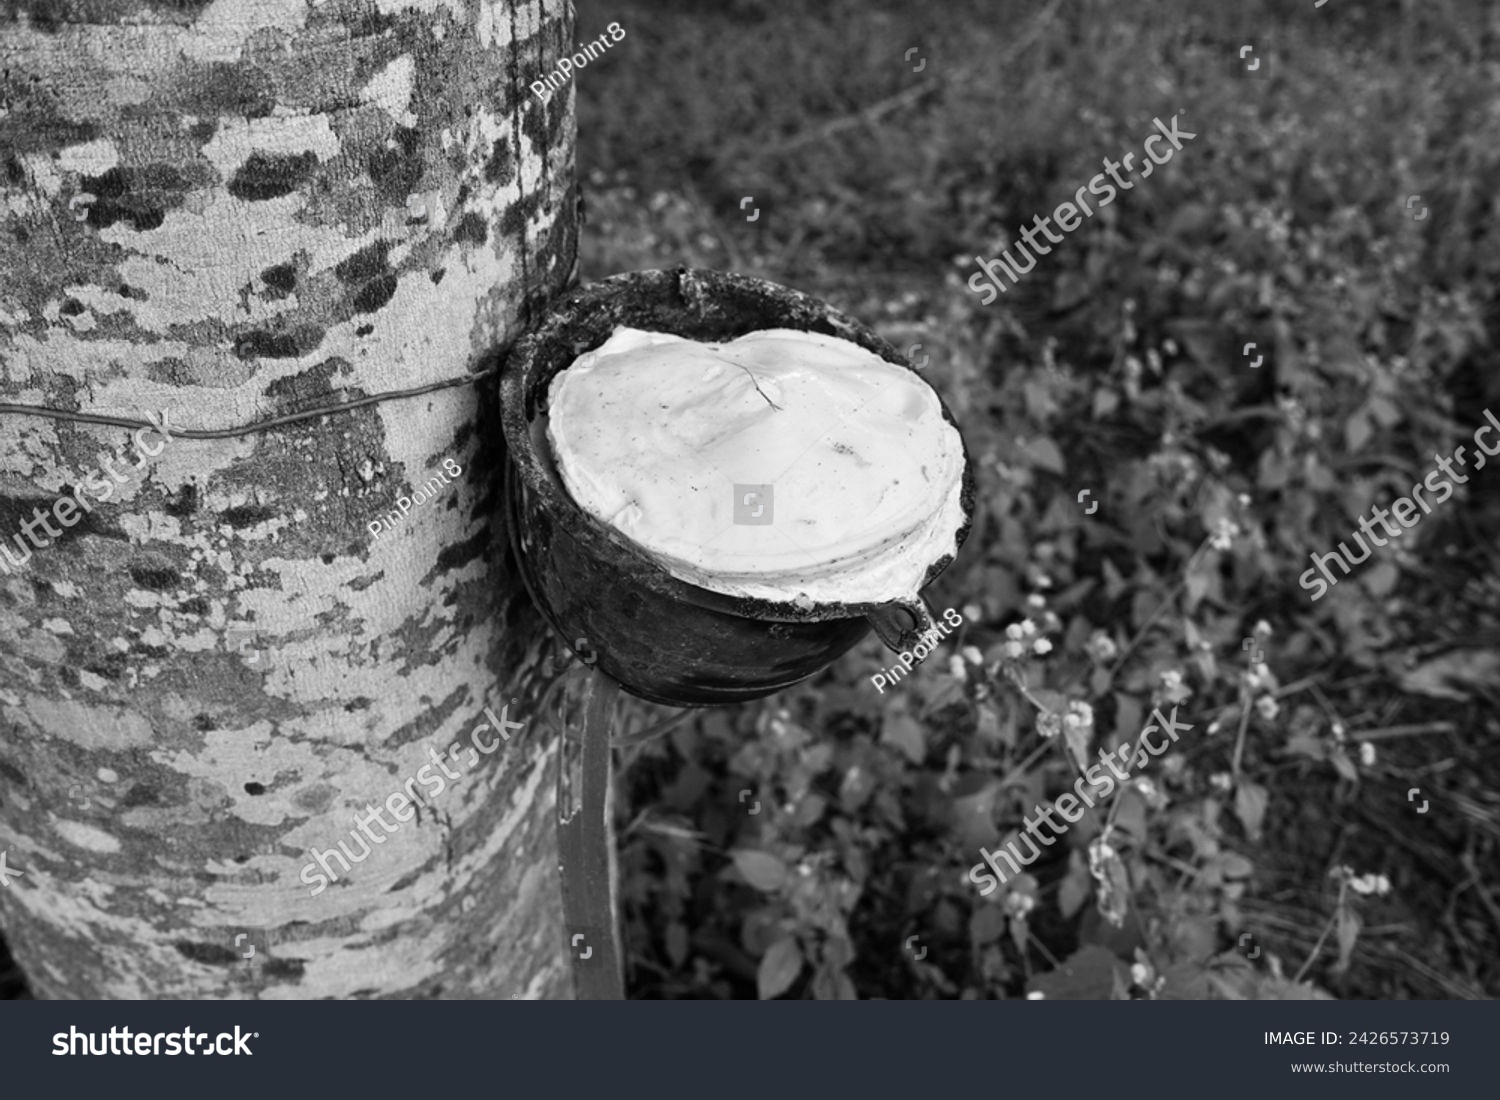 Rubber tapping, Tapping latex rubber tree, Rubber Latex extracted from rubber tree , agricultural gardening products. #2426573719